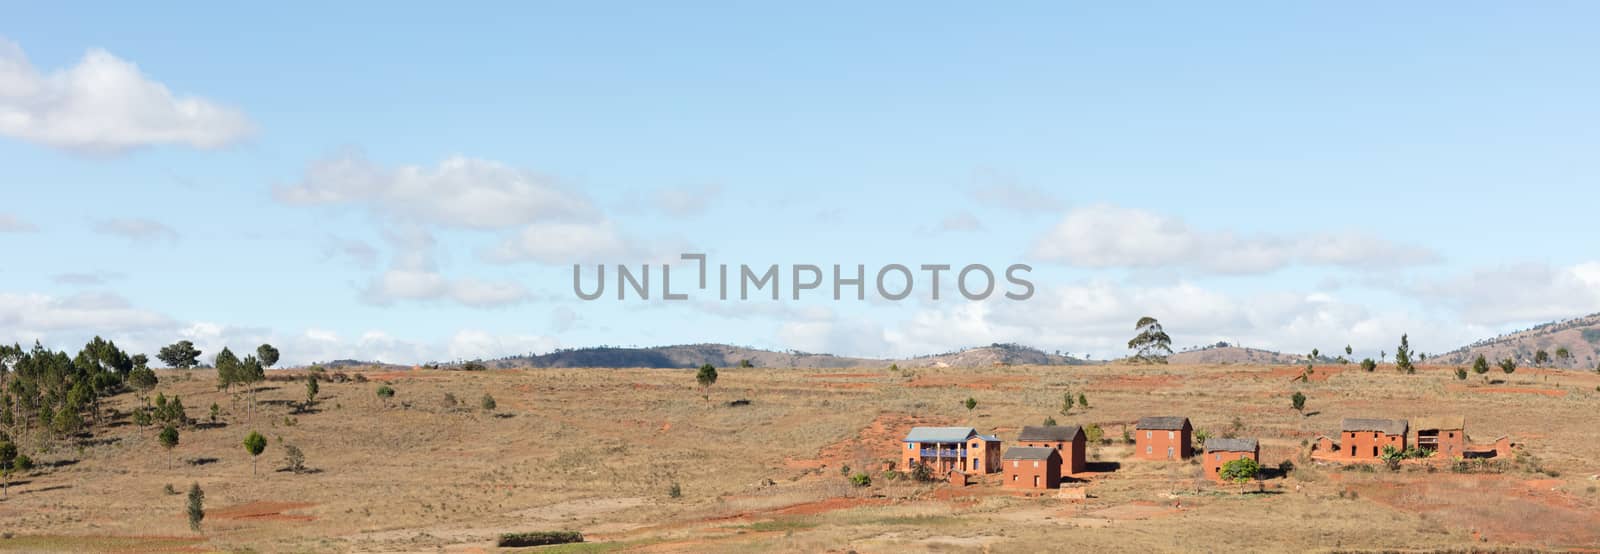 Village and landscape of Madagascar by michaklootwijk